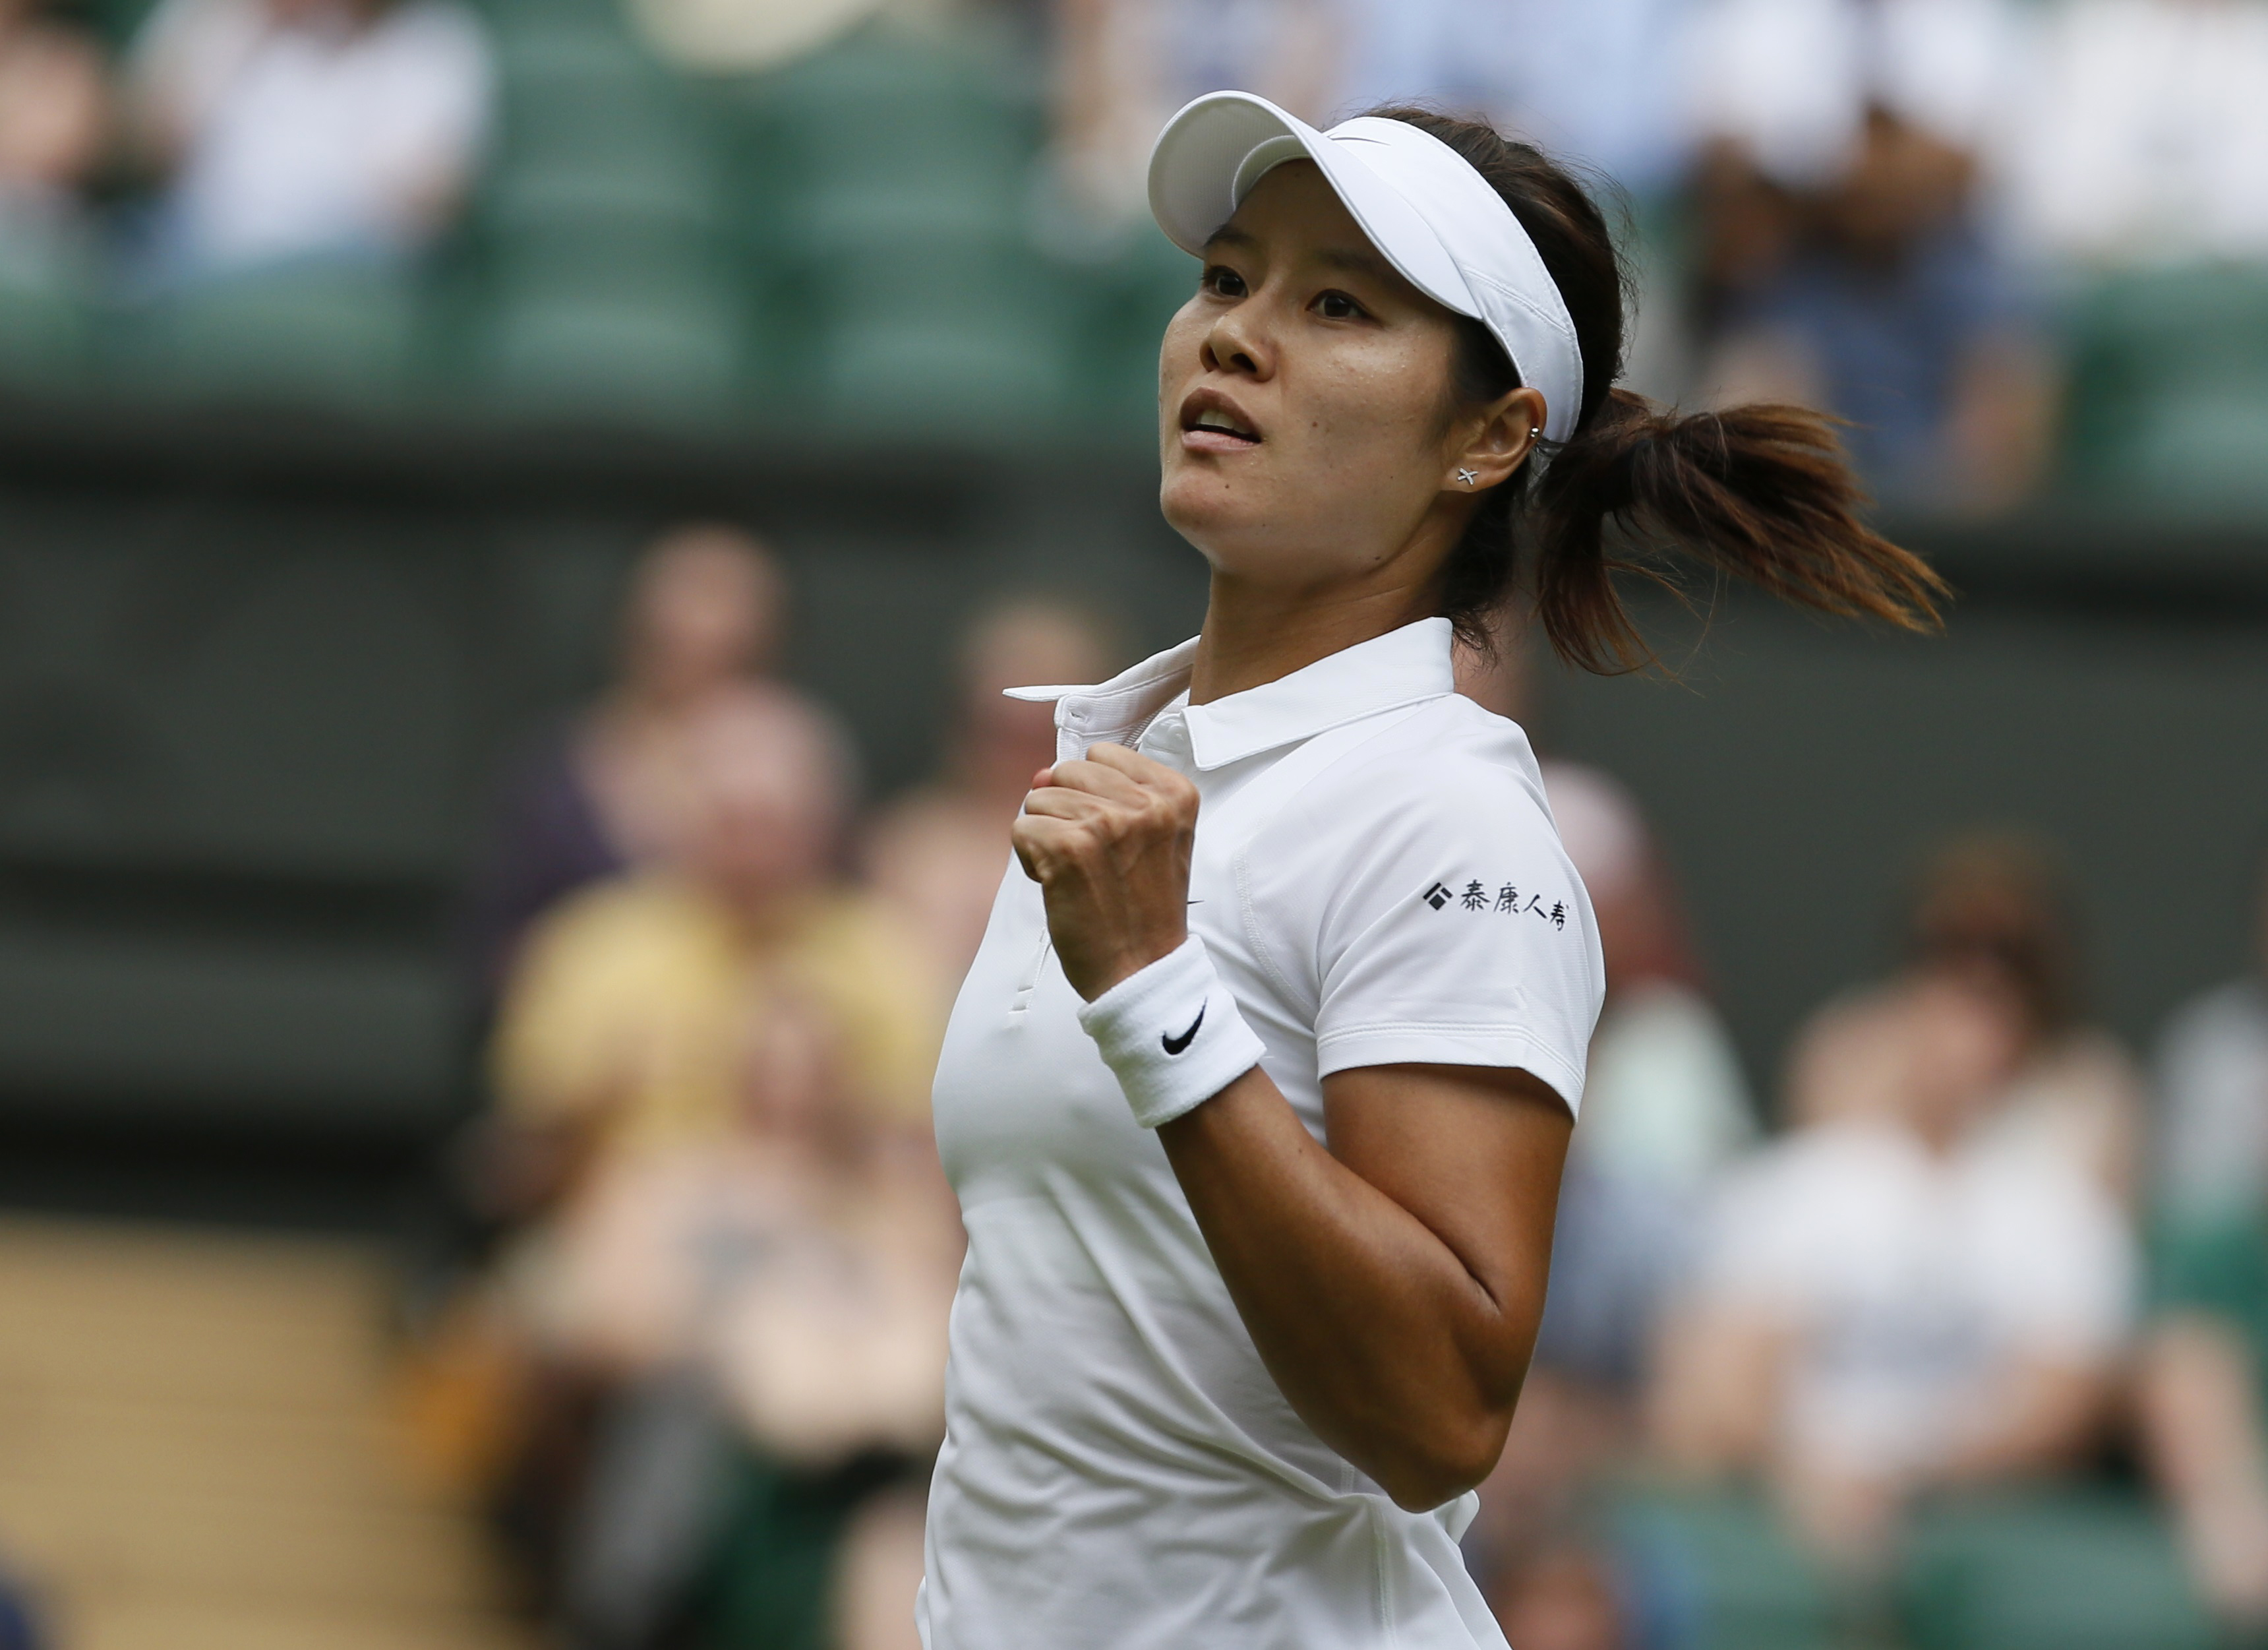 Li Na of China reacts after defeating Paula Kania of Poland in their women's singles tennis match at the Wimbledon Tennis Championships, in London June 23, 2014. (Stefan Wermuth—Reuters)